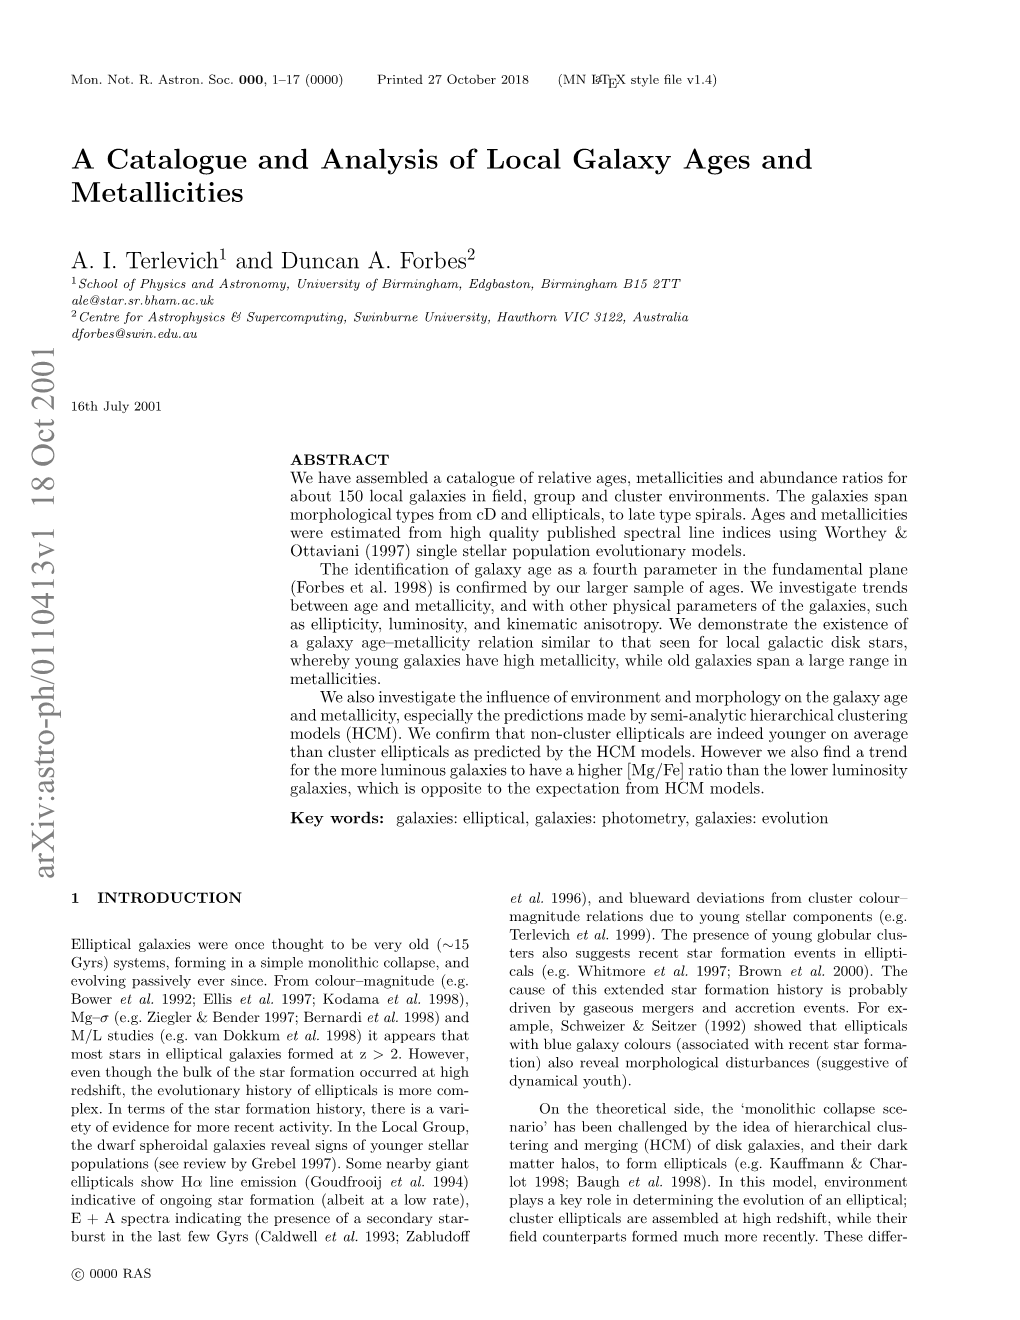 A Catalogue and Analysis of Local Galaxy Ages and Metallicities